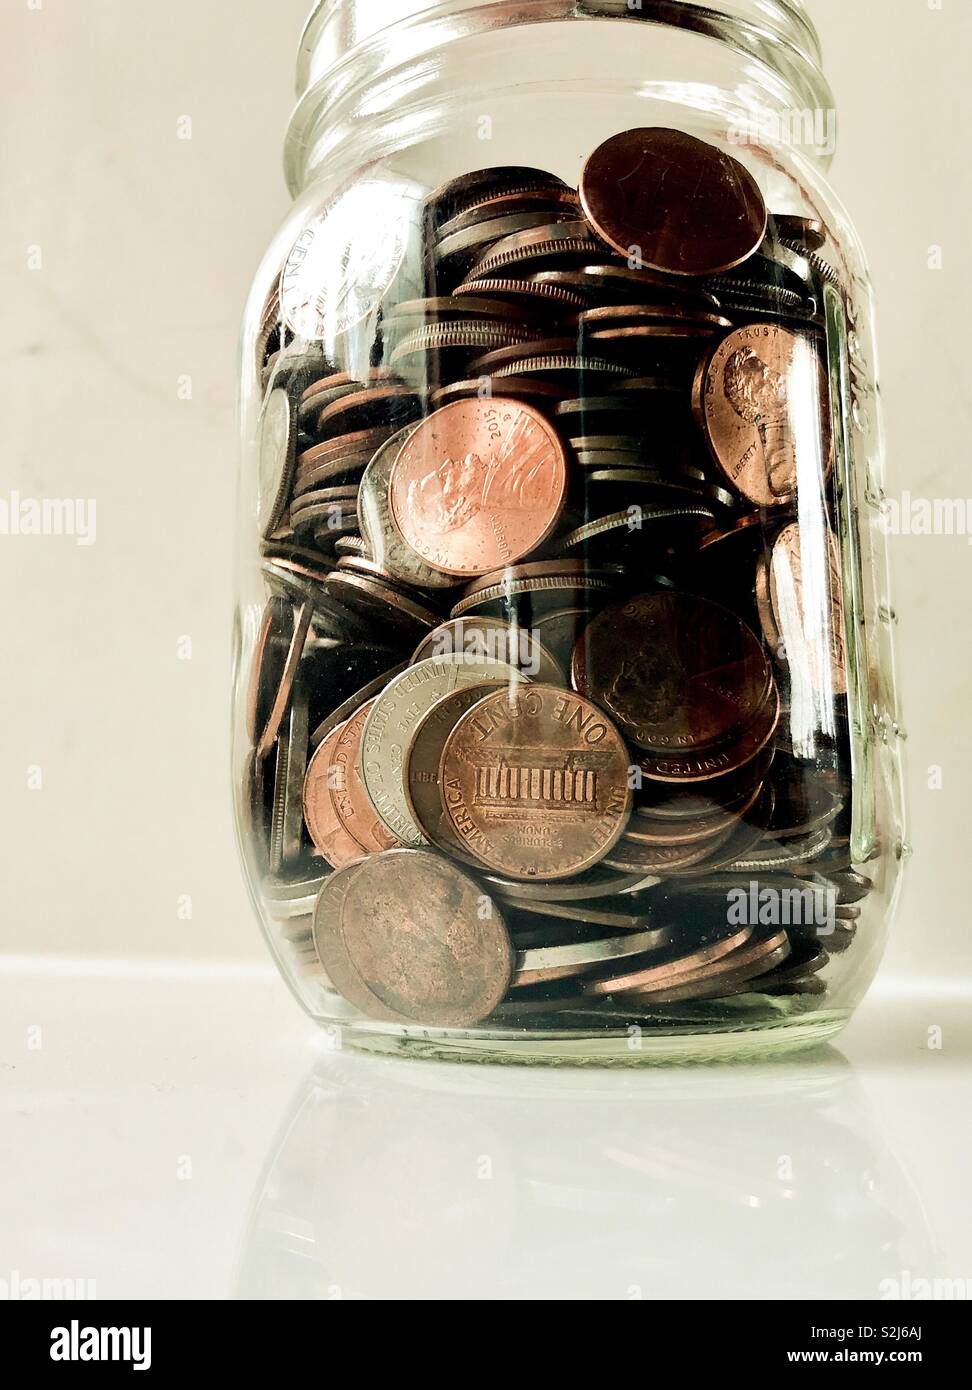 Jar of coins Stock Photo